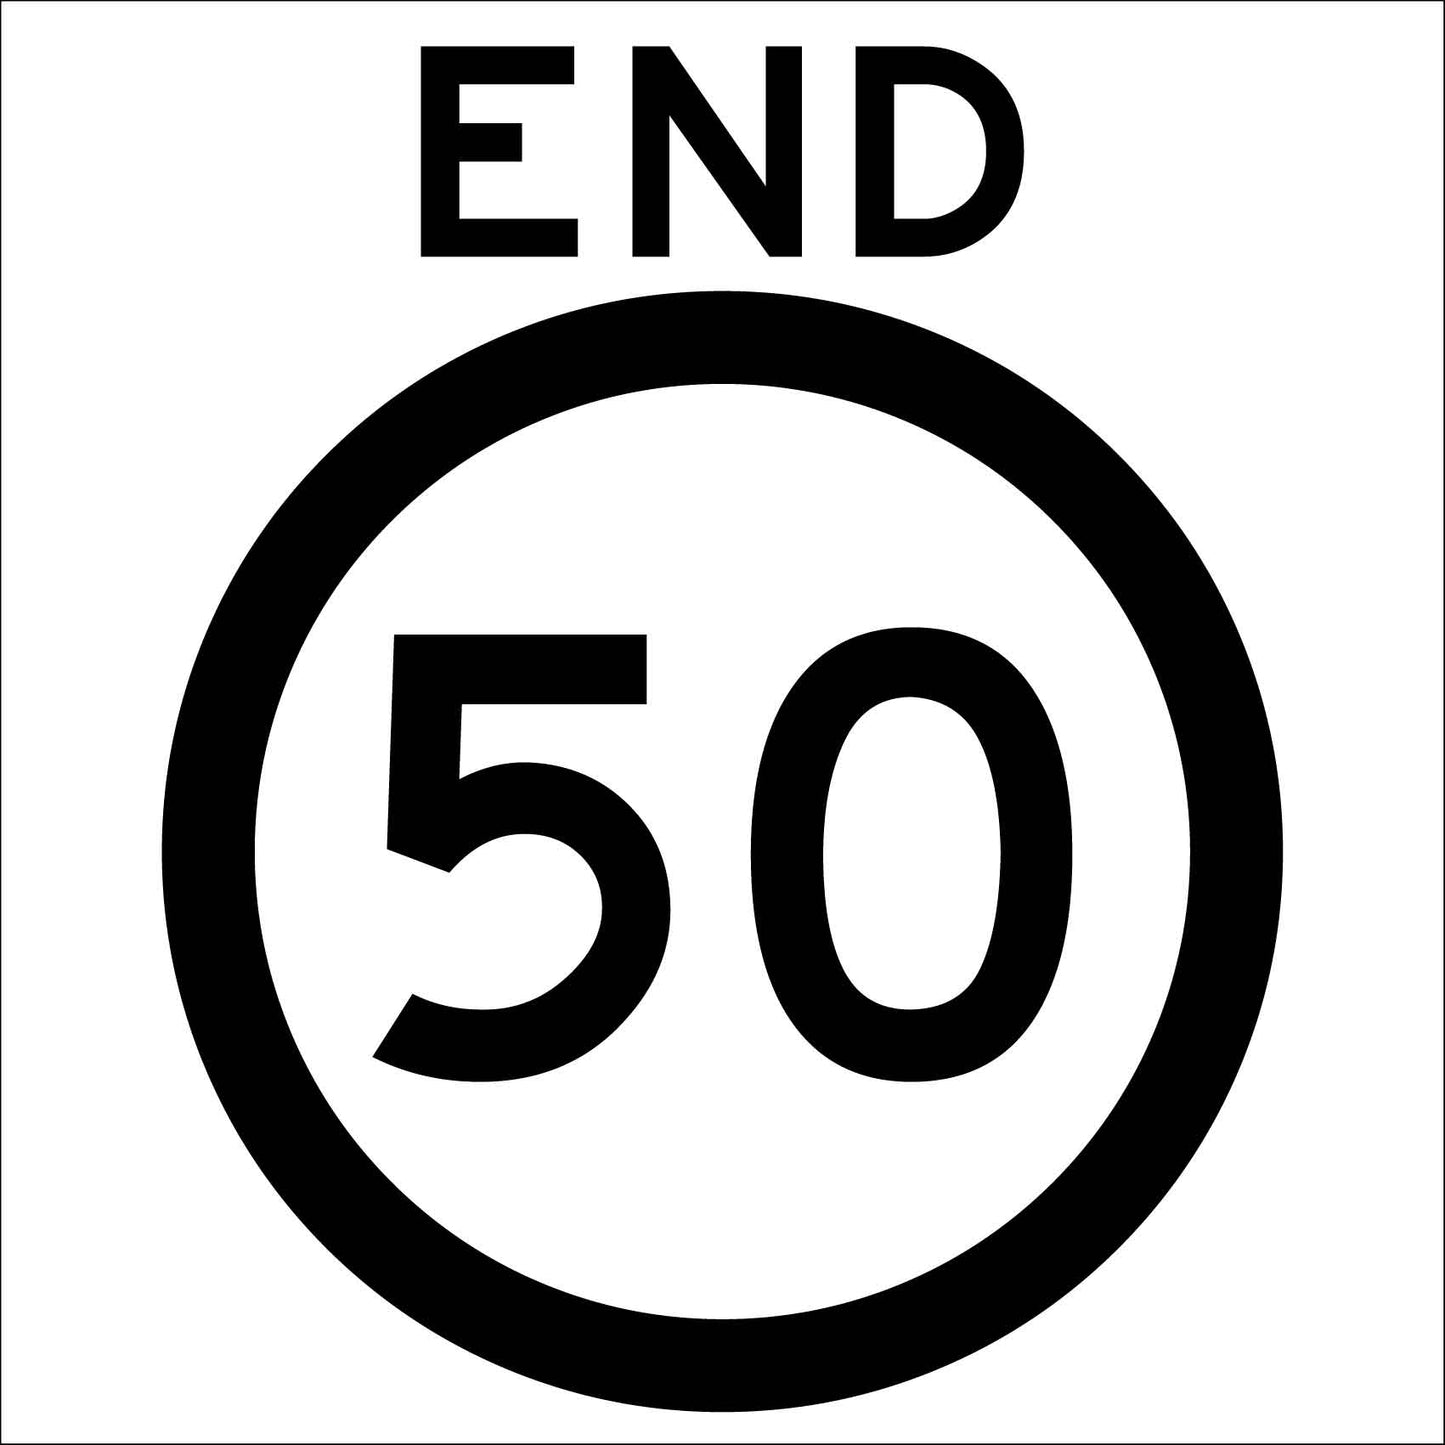 End 50km Multi Message Reflective Traffic Sign